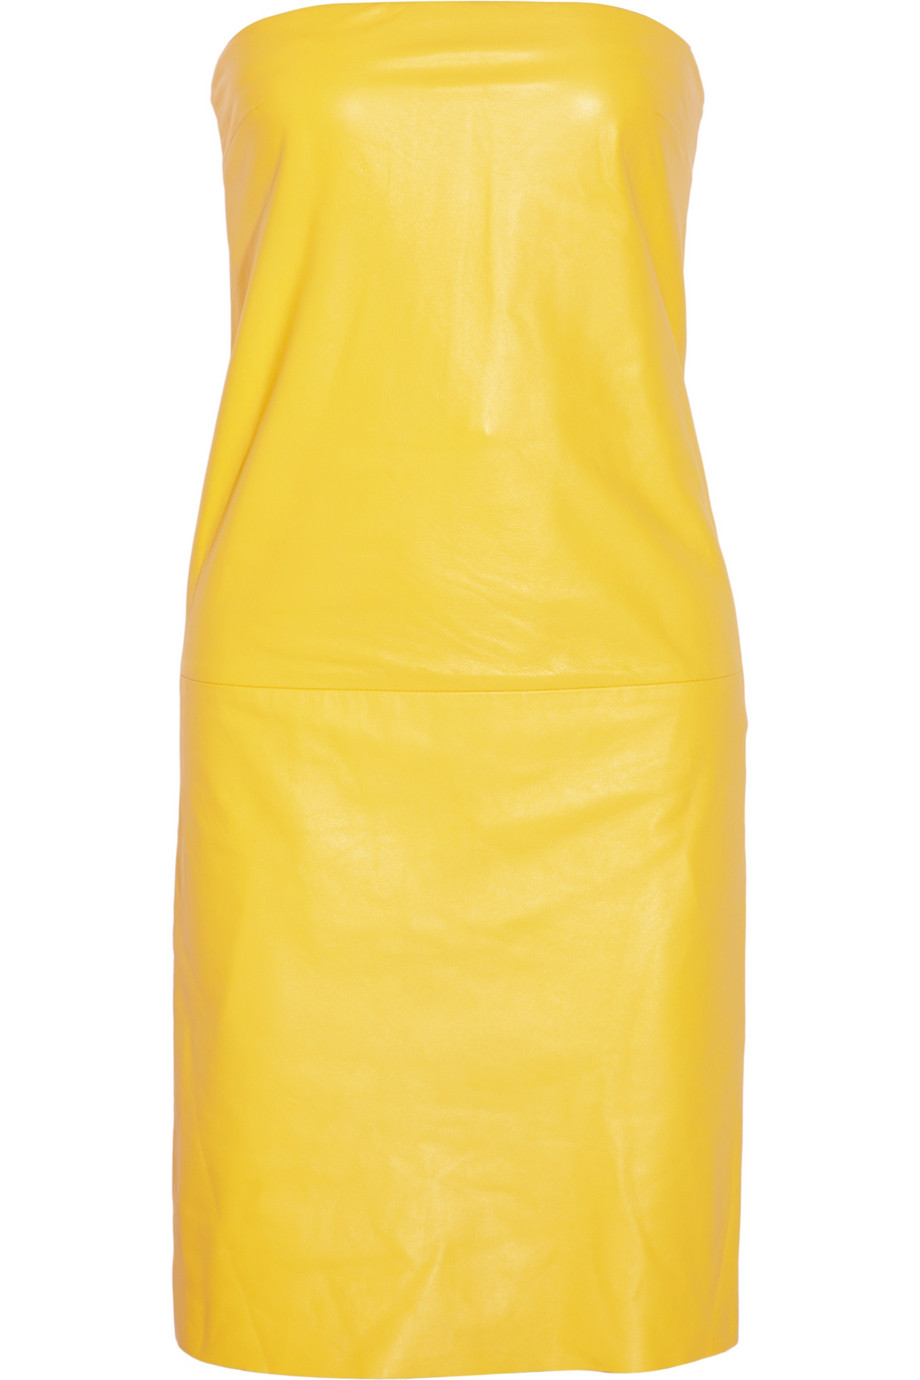 Ralph lauren collection Eugenia Strapless Leather Dress in Yellow | Lyst